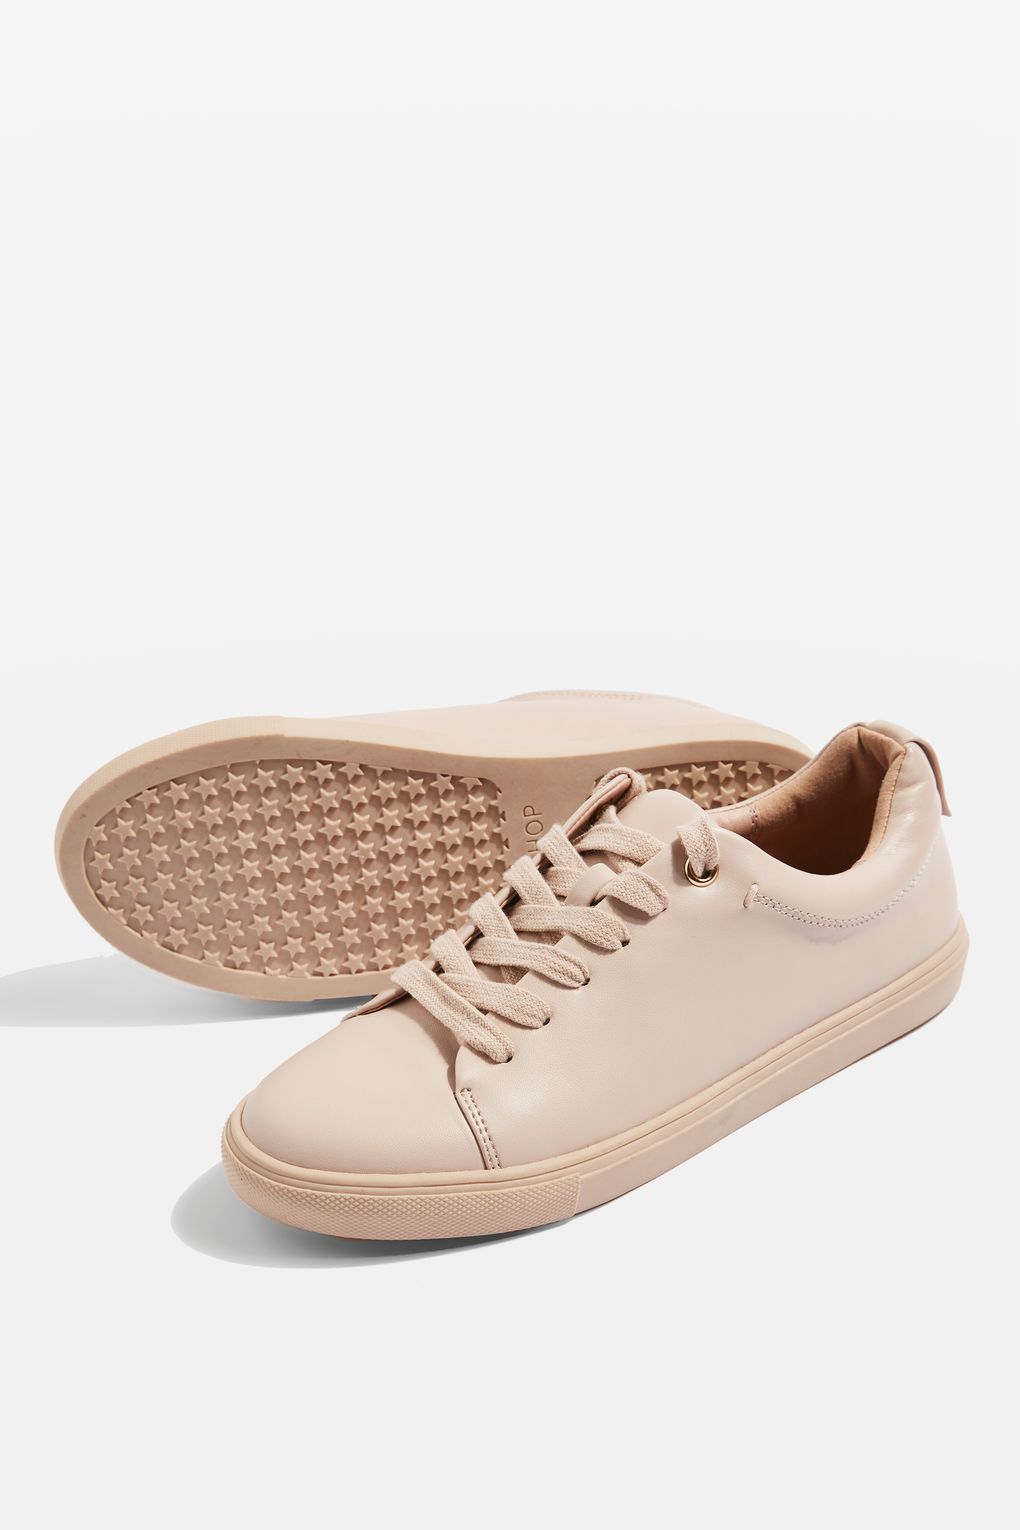 COFFEE Lace Up Trainers